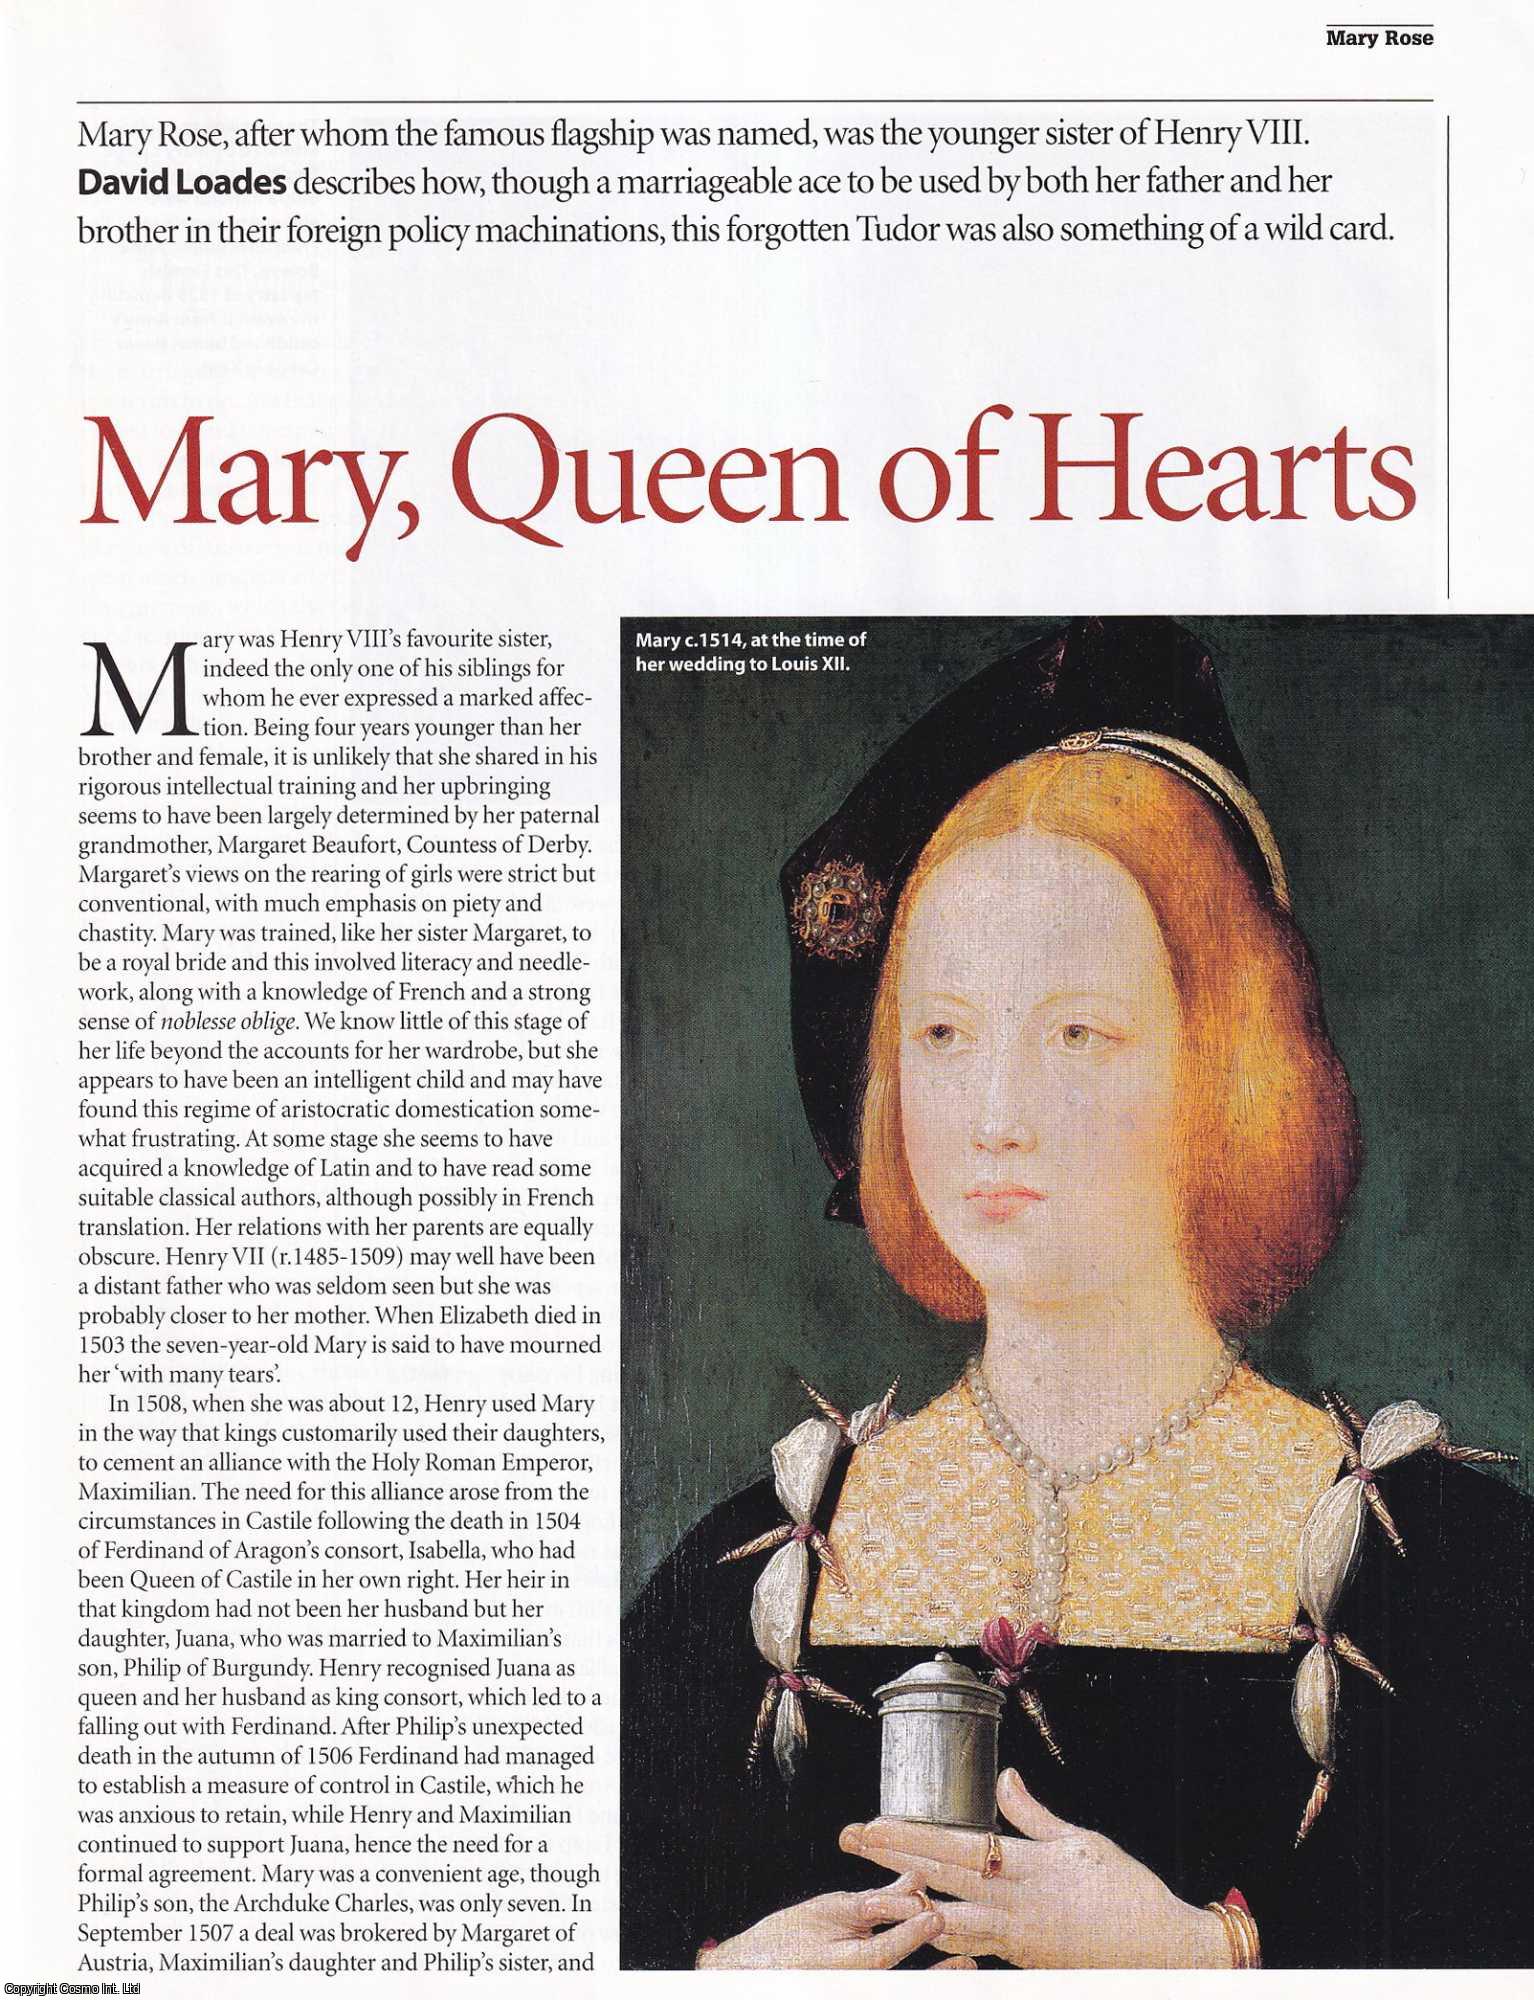 David Loades - Mary Rose: a Neglected Tudor, Younger Sister of Henry VIII. An original article from History Today magazine, 2012.